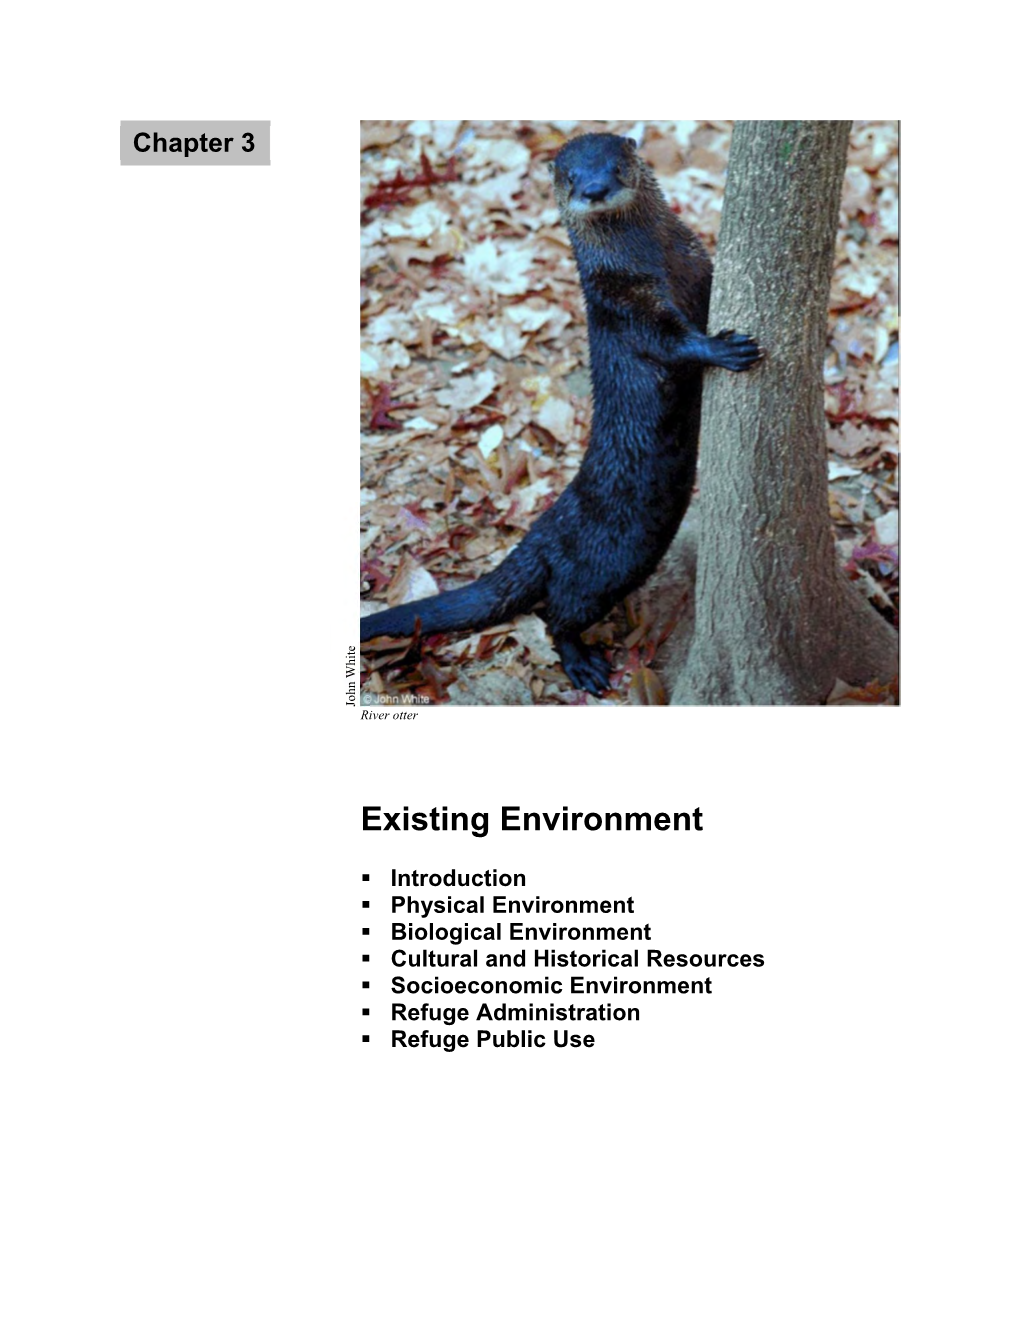 Chapter 3 Existing Environment